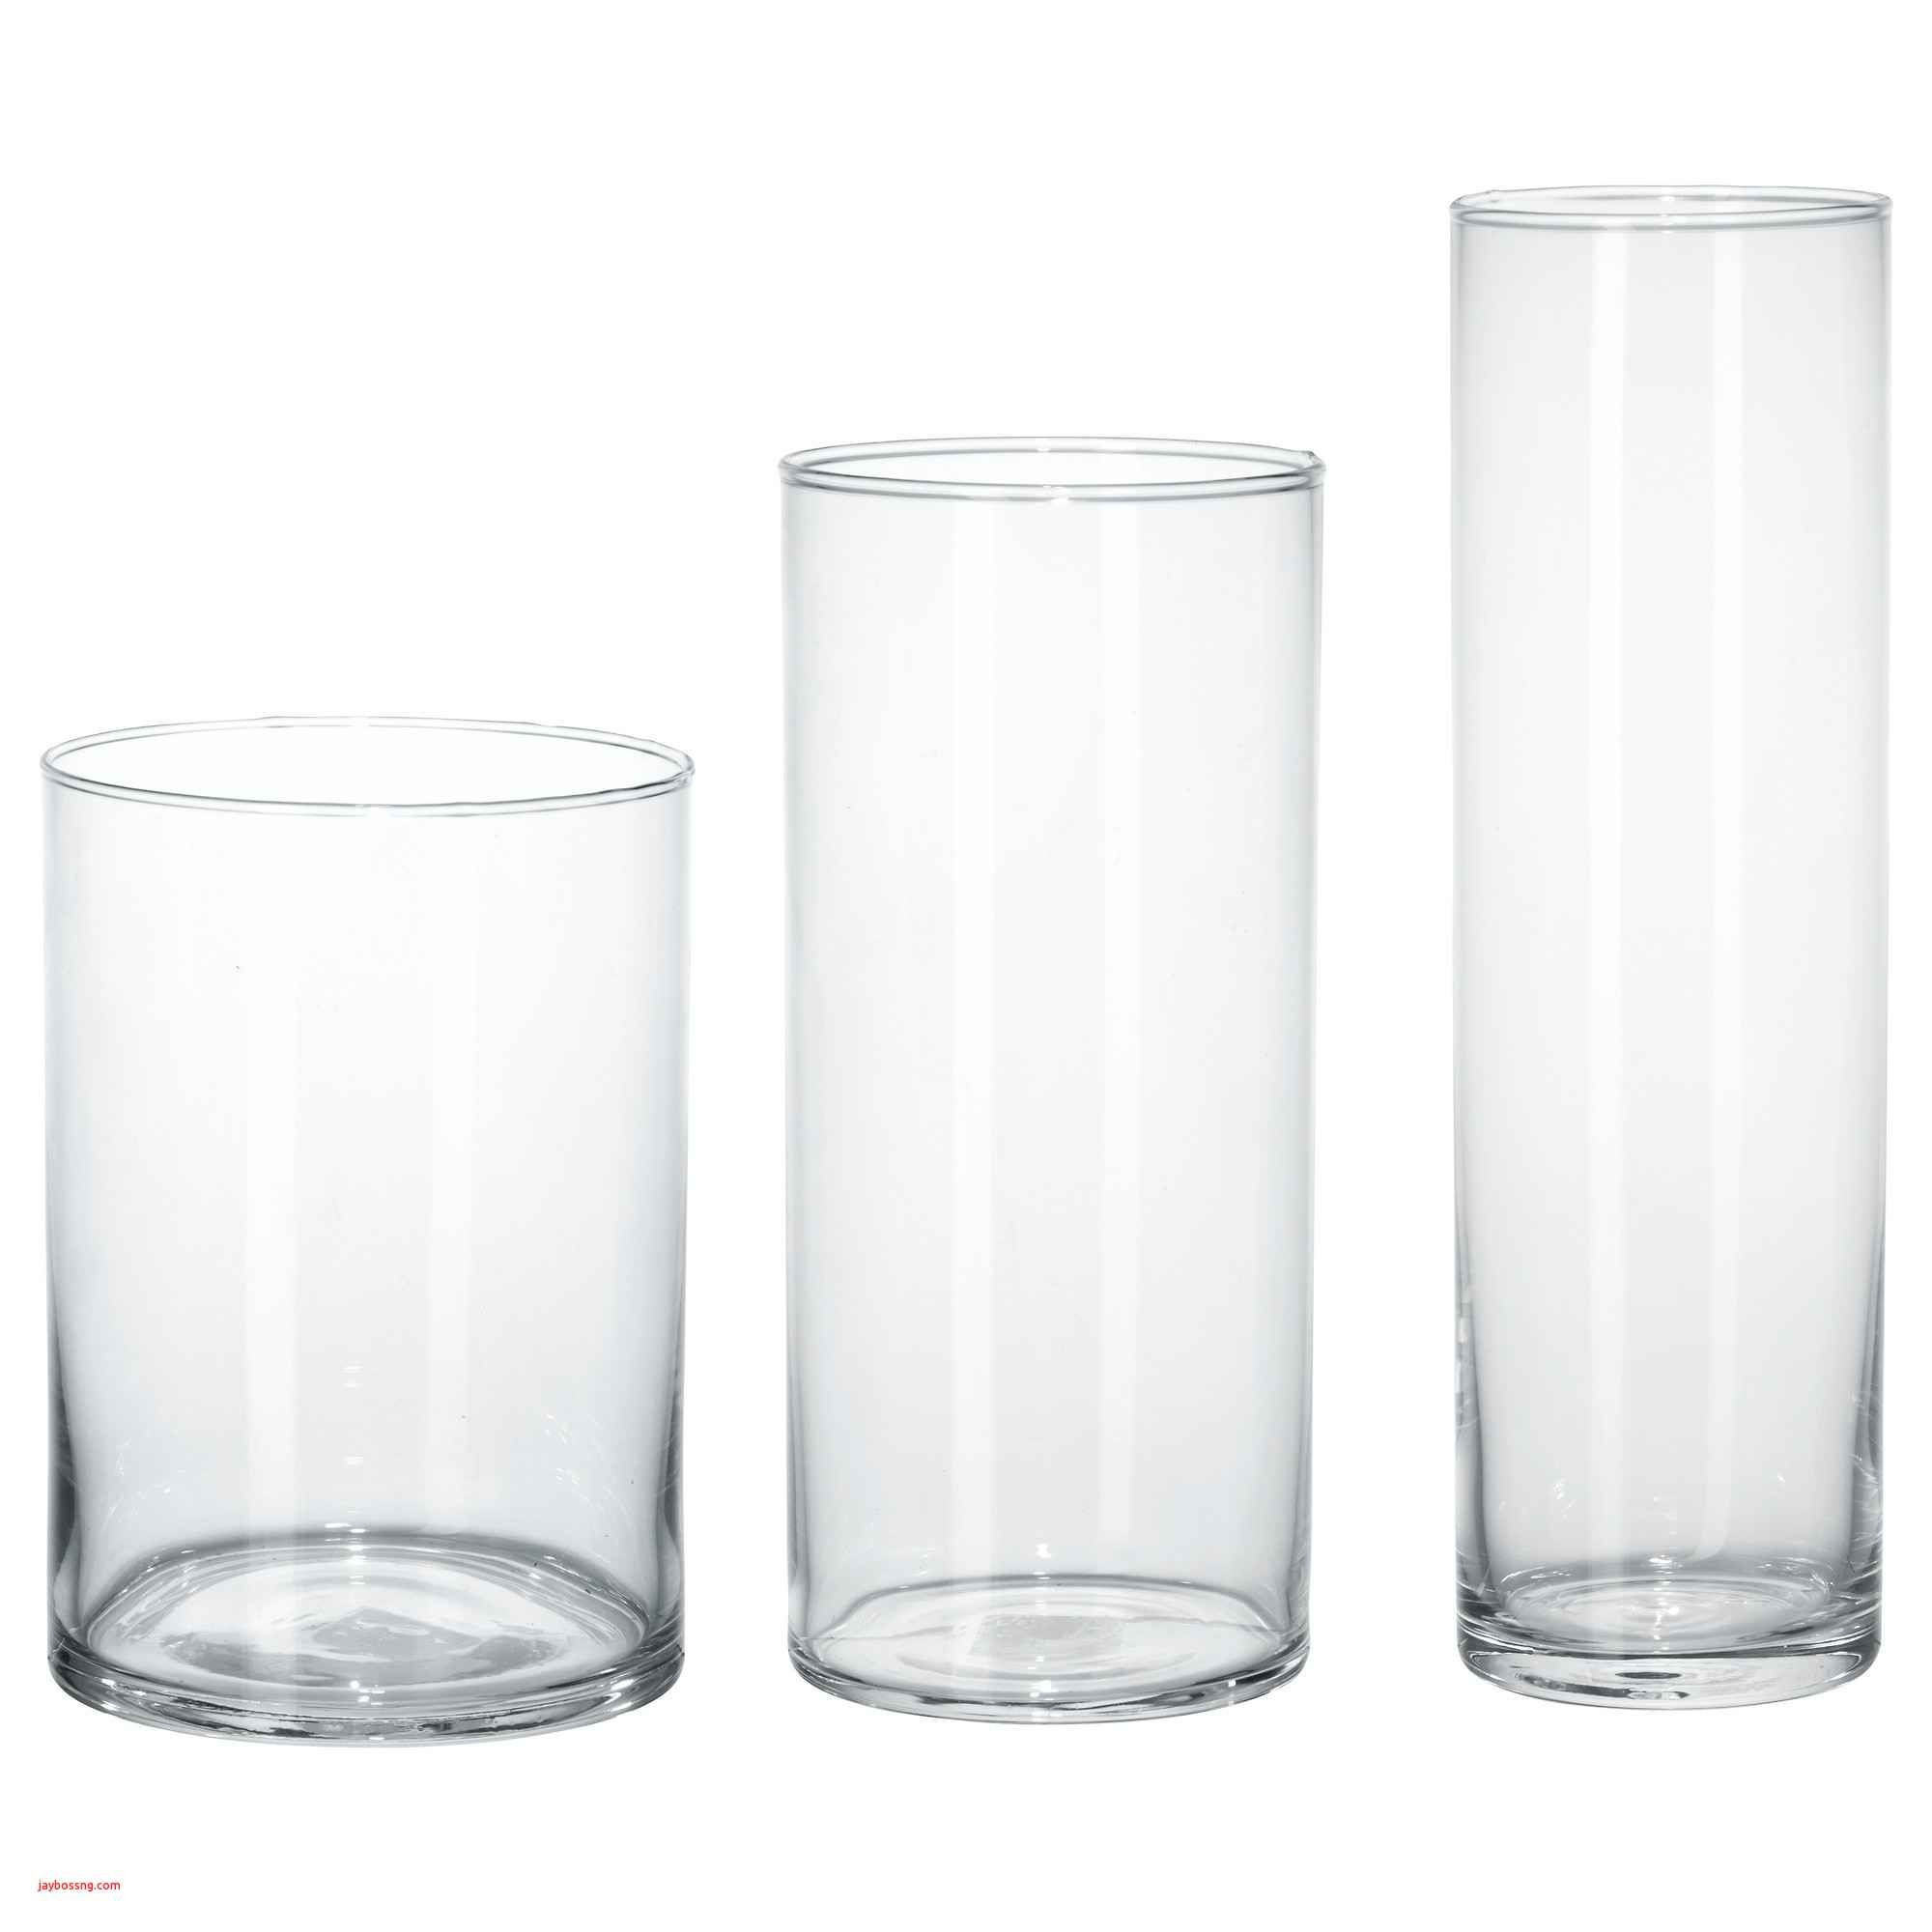 20 attractive Clear Glass Vase Square 2024 free download clear glass vase square of brown glass vase fresh ikea white table created pe s5h vases ikea pertaining to brown glass vase fresh ikea white table created pe s5h vases ikea vase i 0d bladet